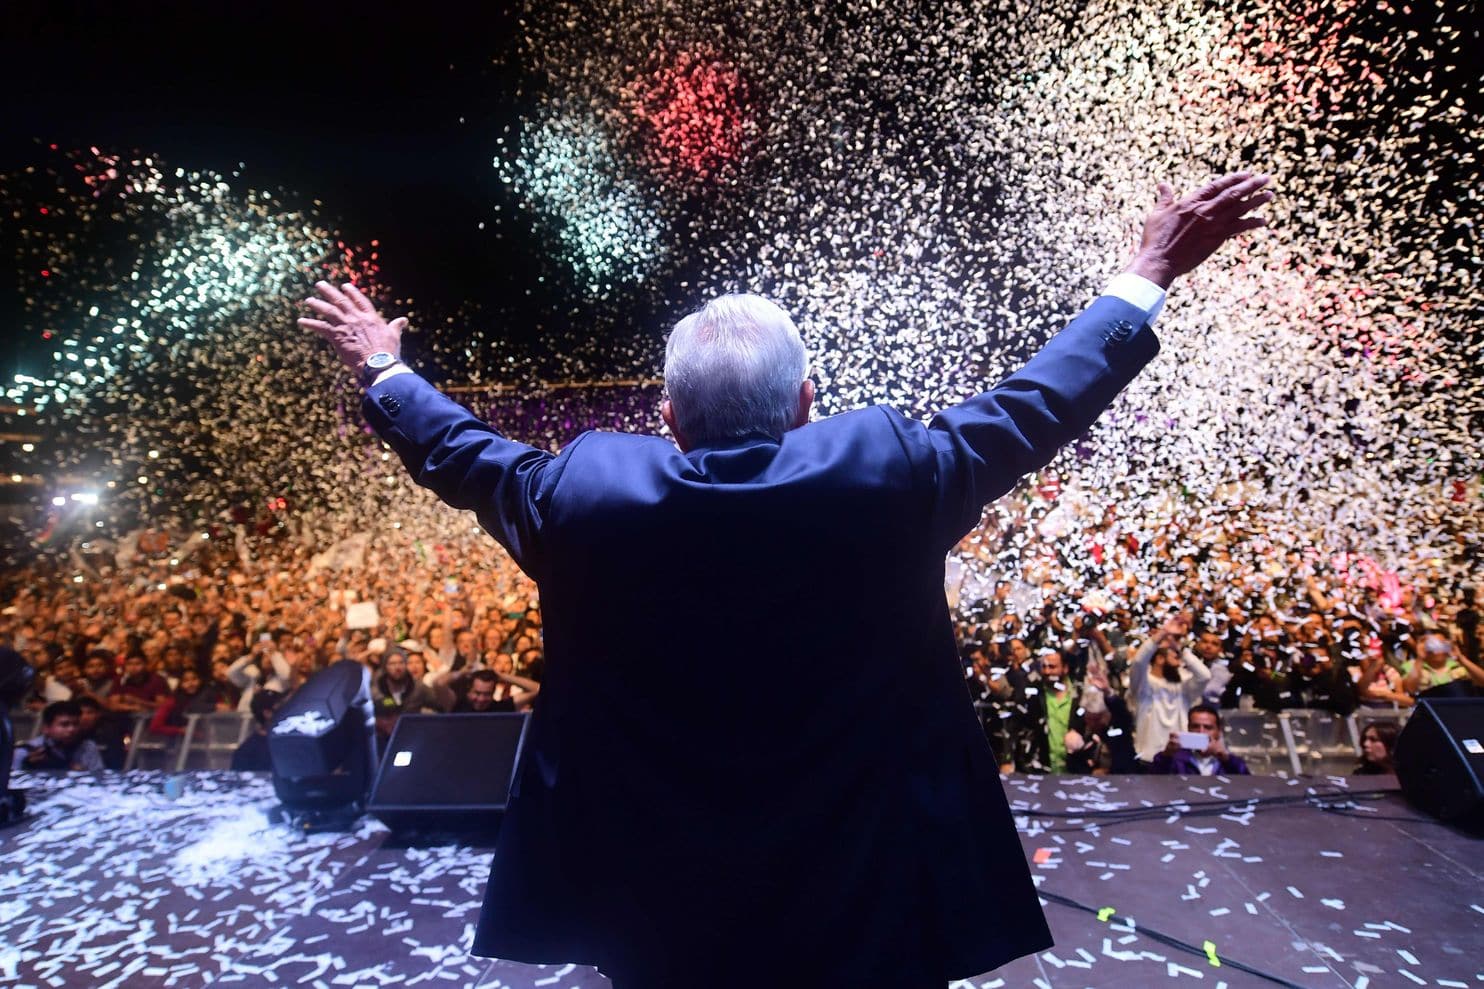 The wildly ambitious plan of Mexico's President AMLO